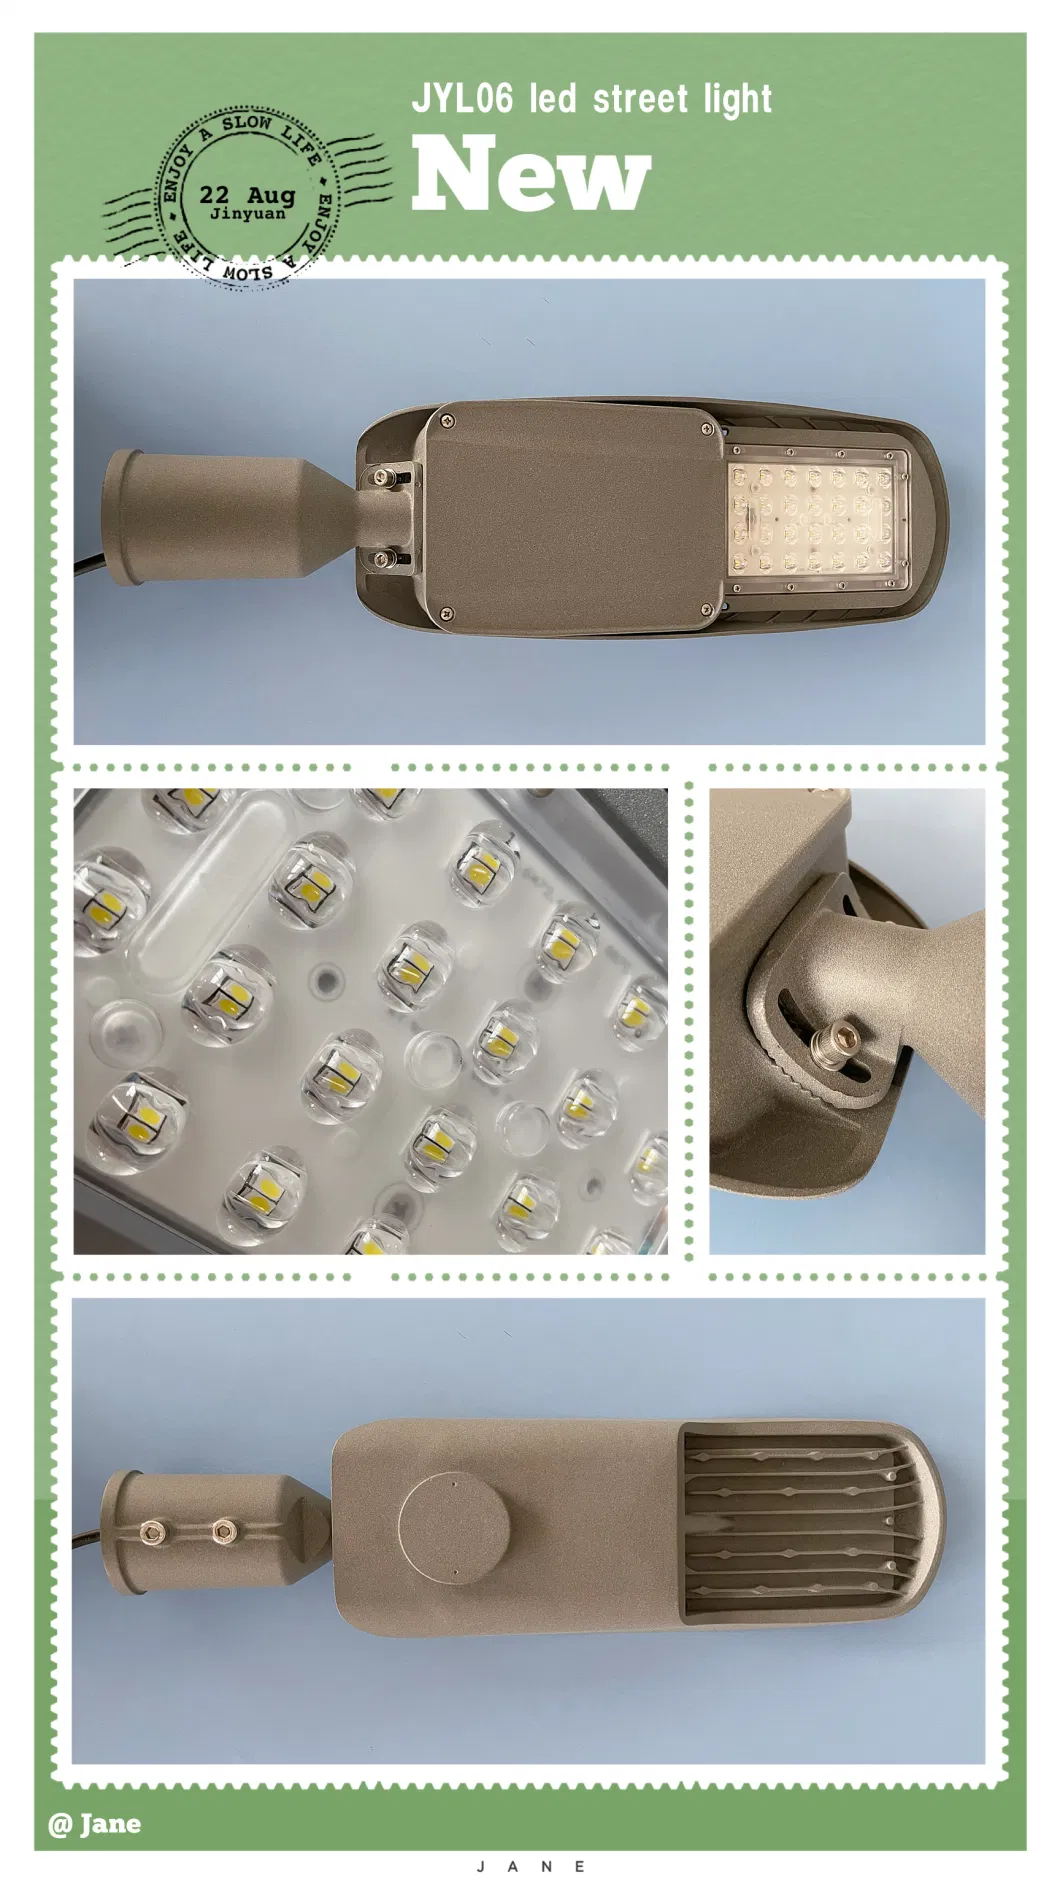 Jyl06s CKD High Light Efficiency 160-170lm/W 30-100W LED Street Lighting for Urban and Residential Area